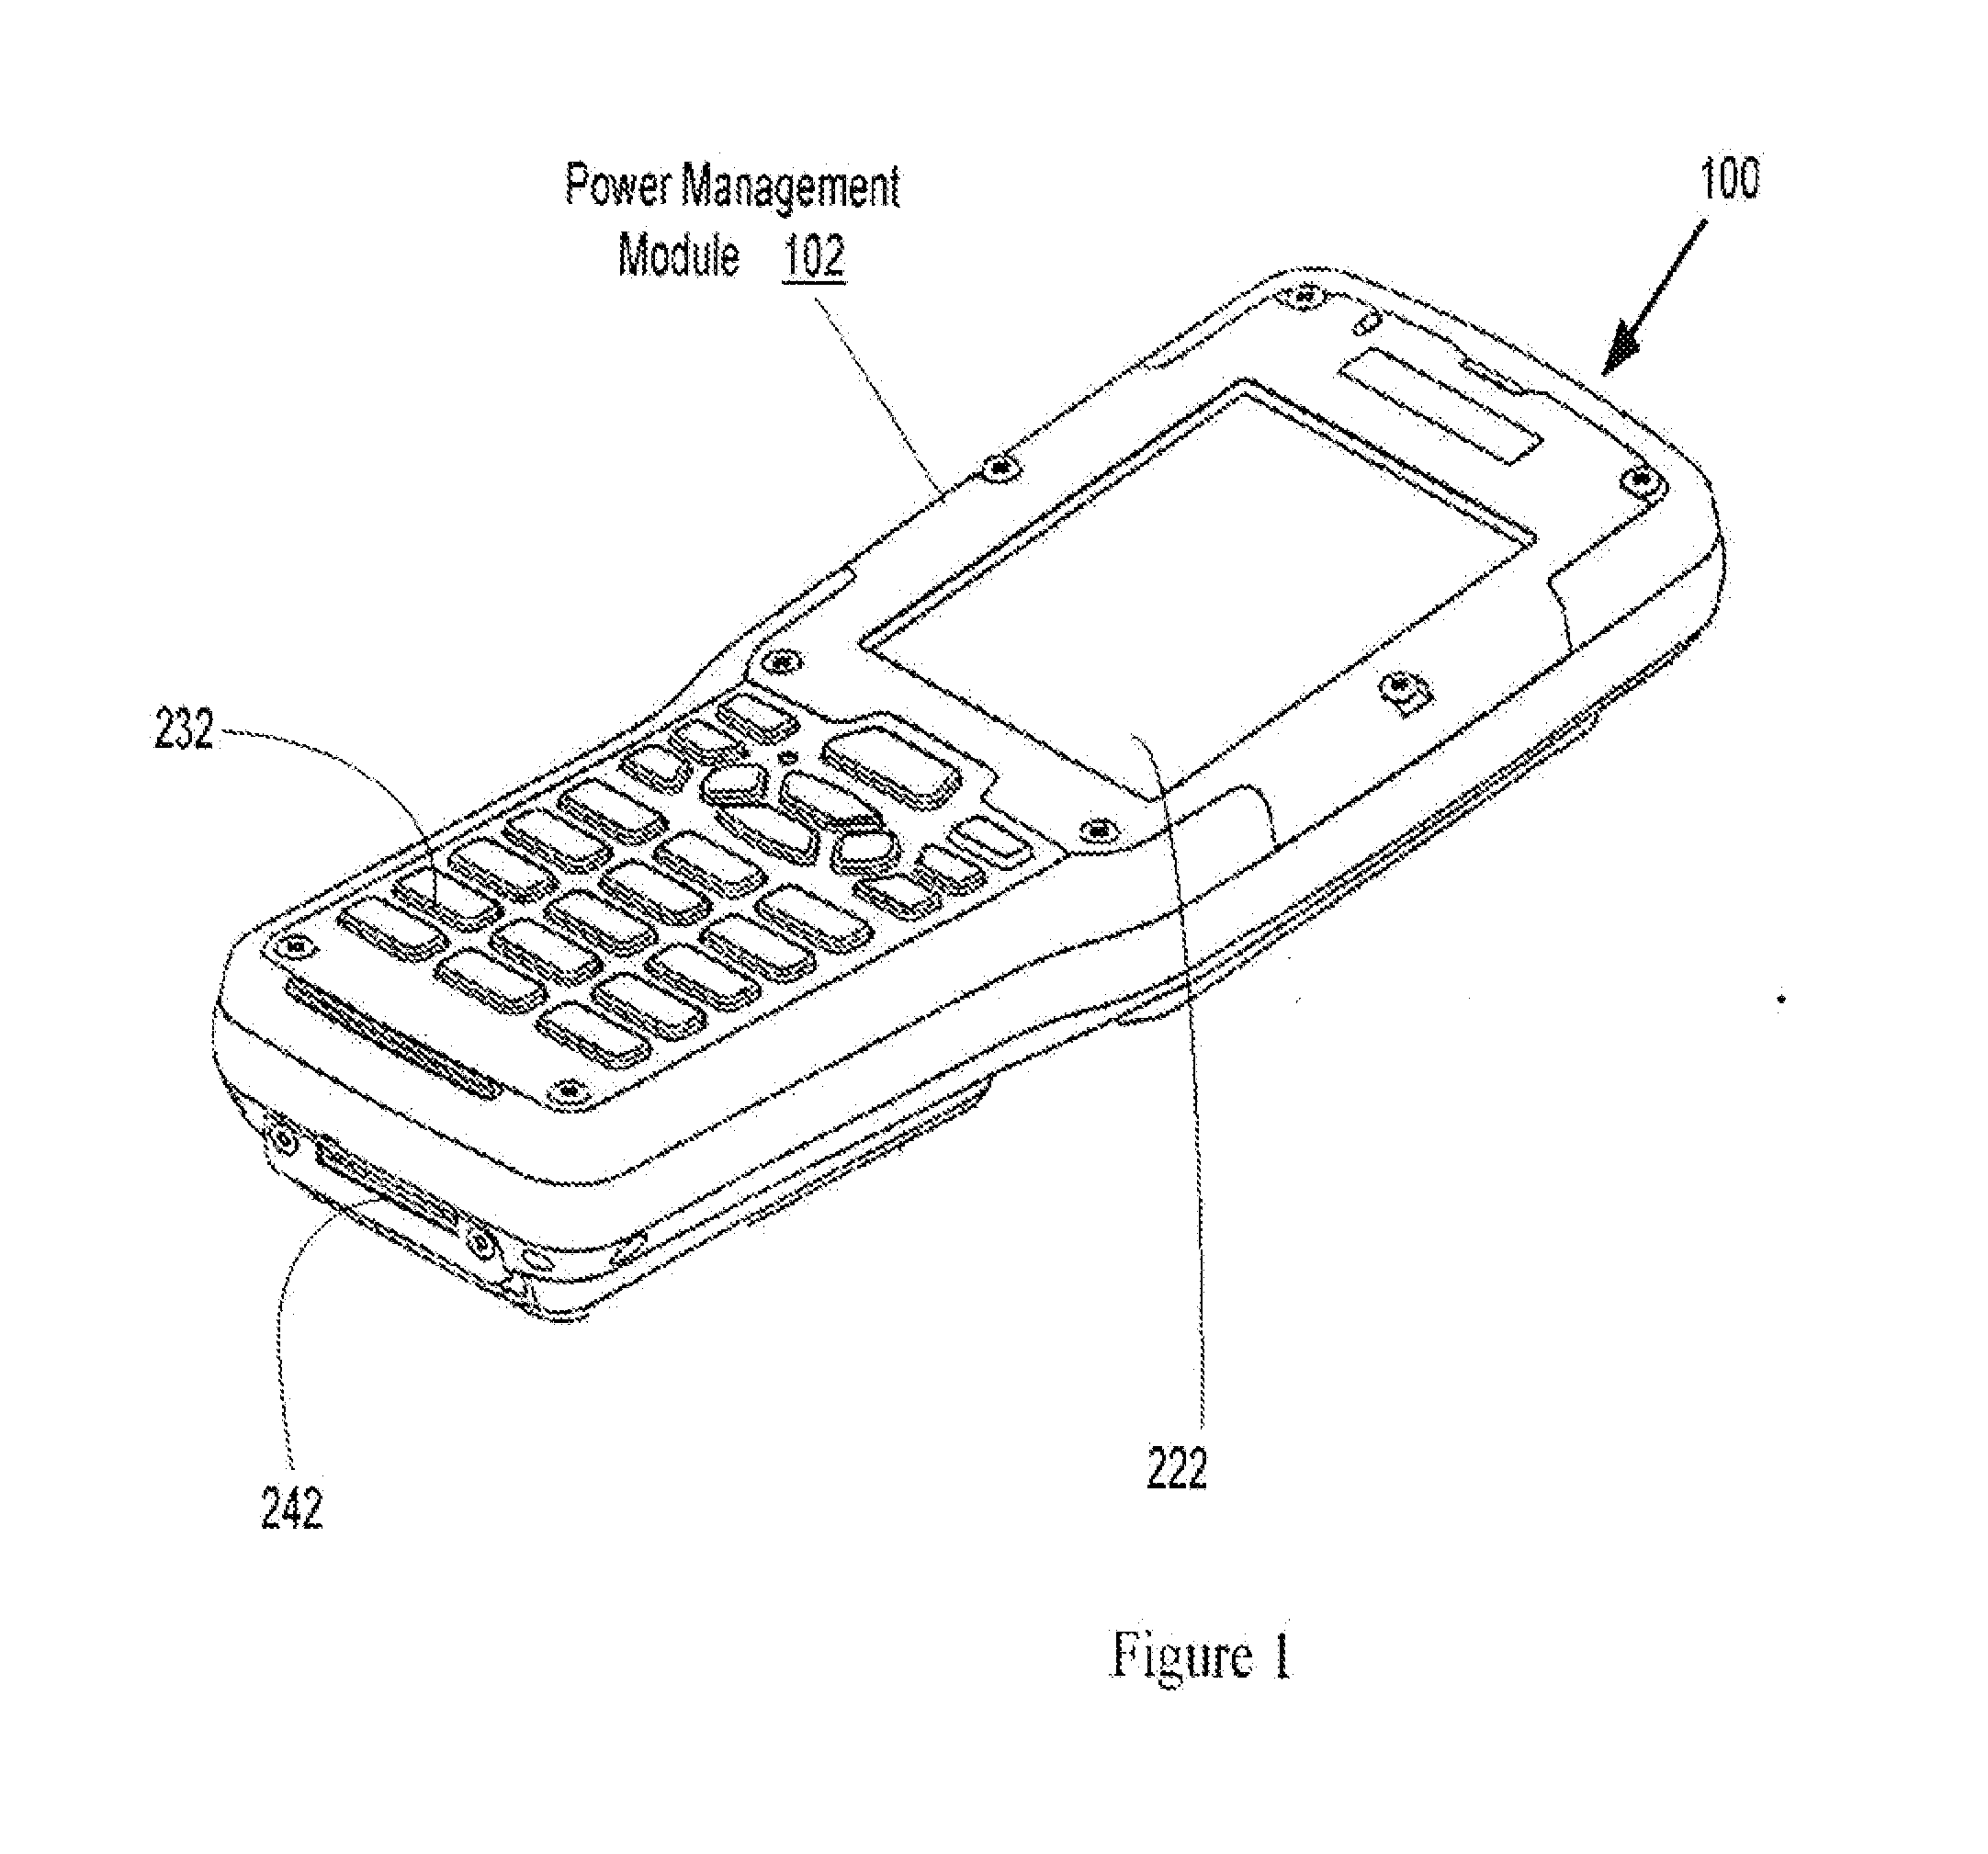 Method and apparatus for optimal allocation of operating power across multiple power domains of a handheld device